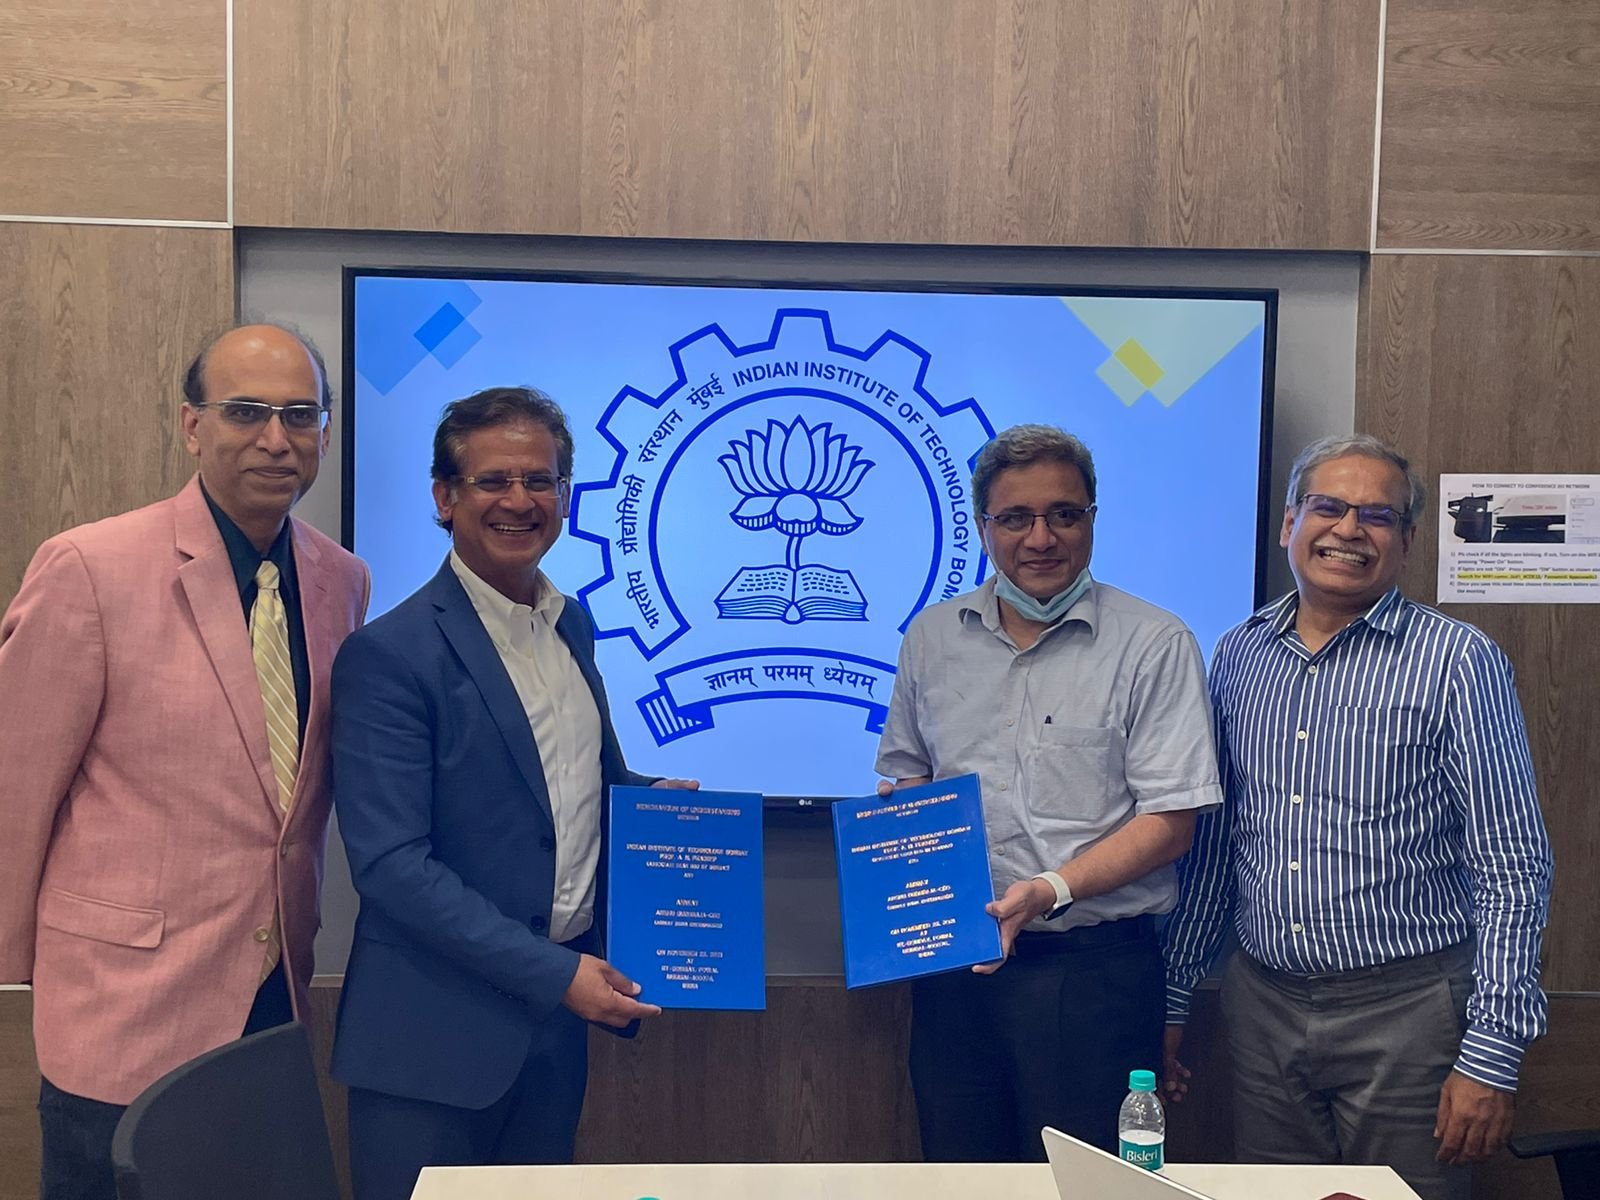 Amway India signs MoU with IIT Bombay_30112021